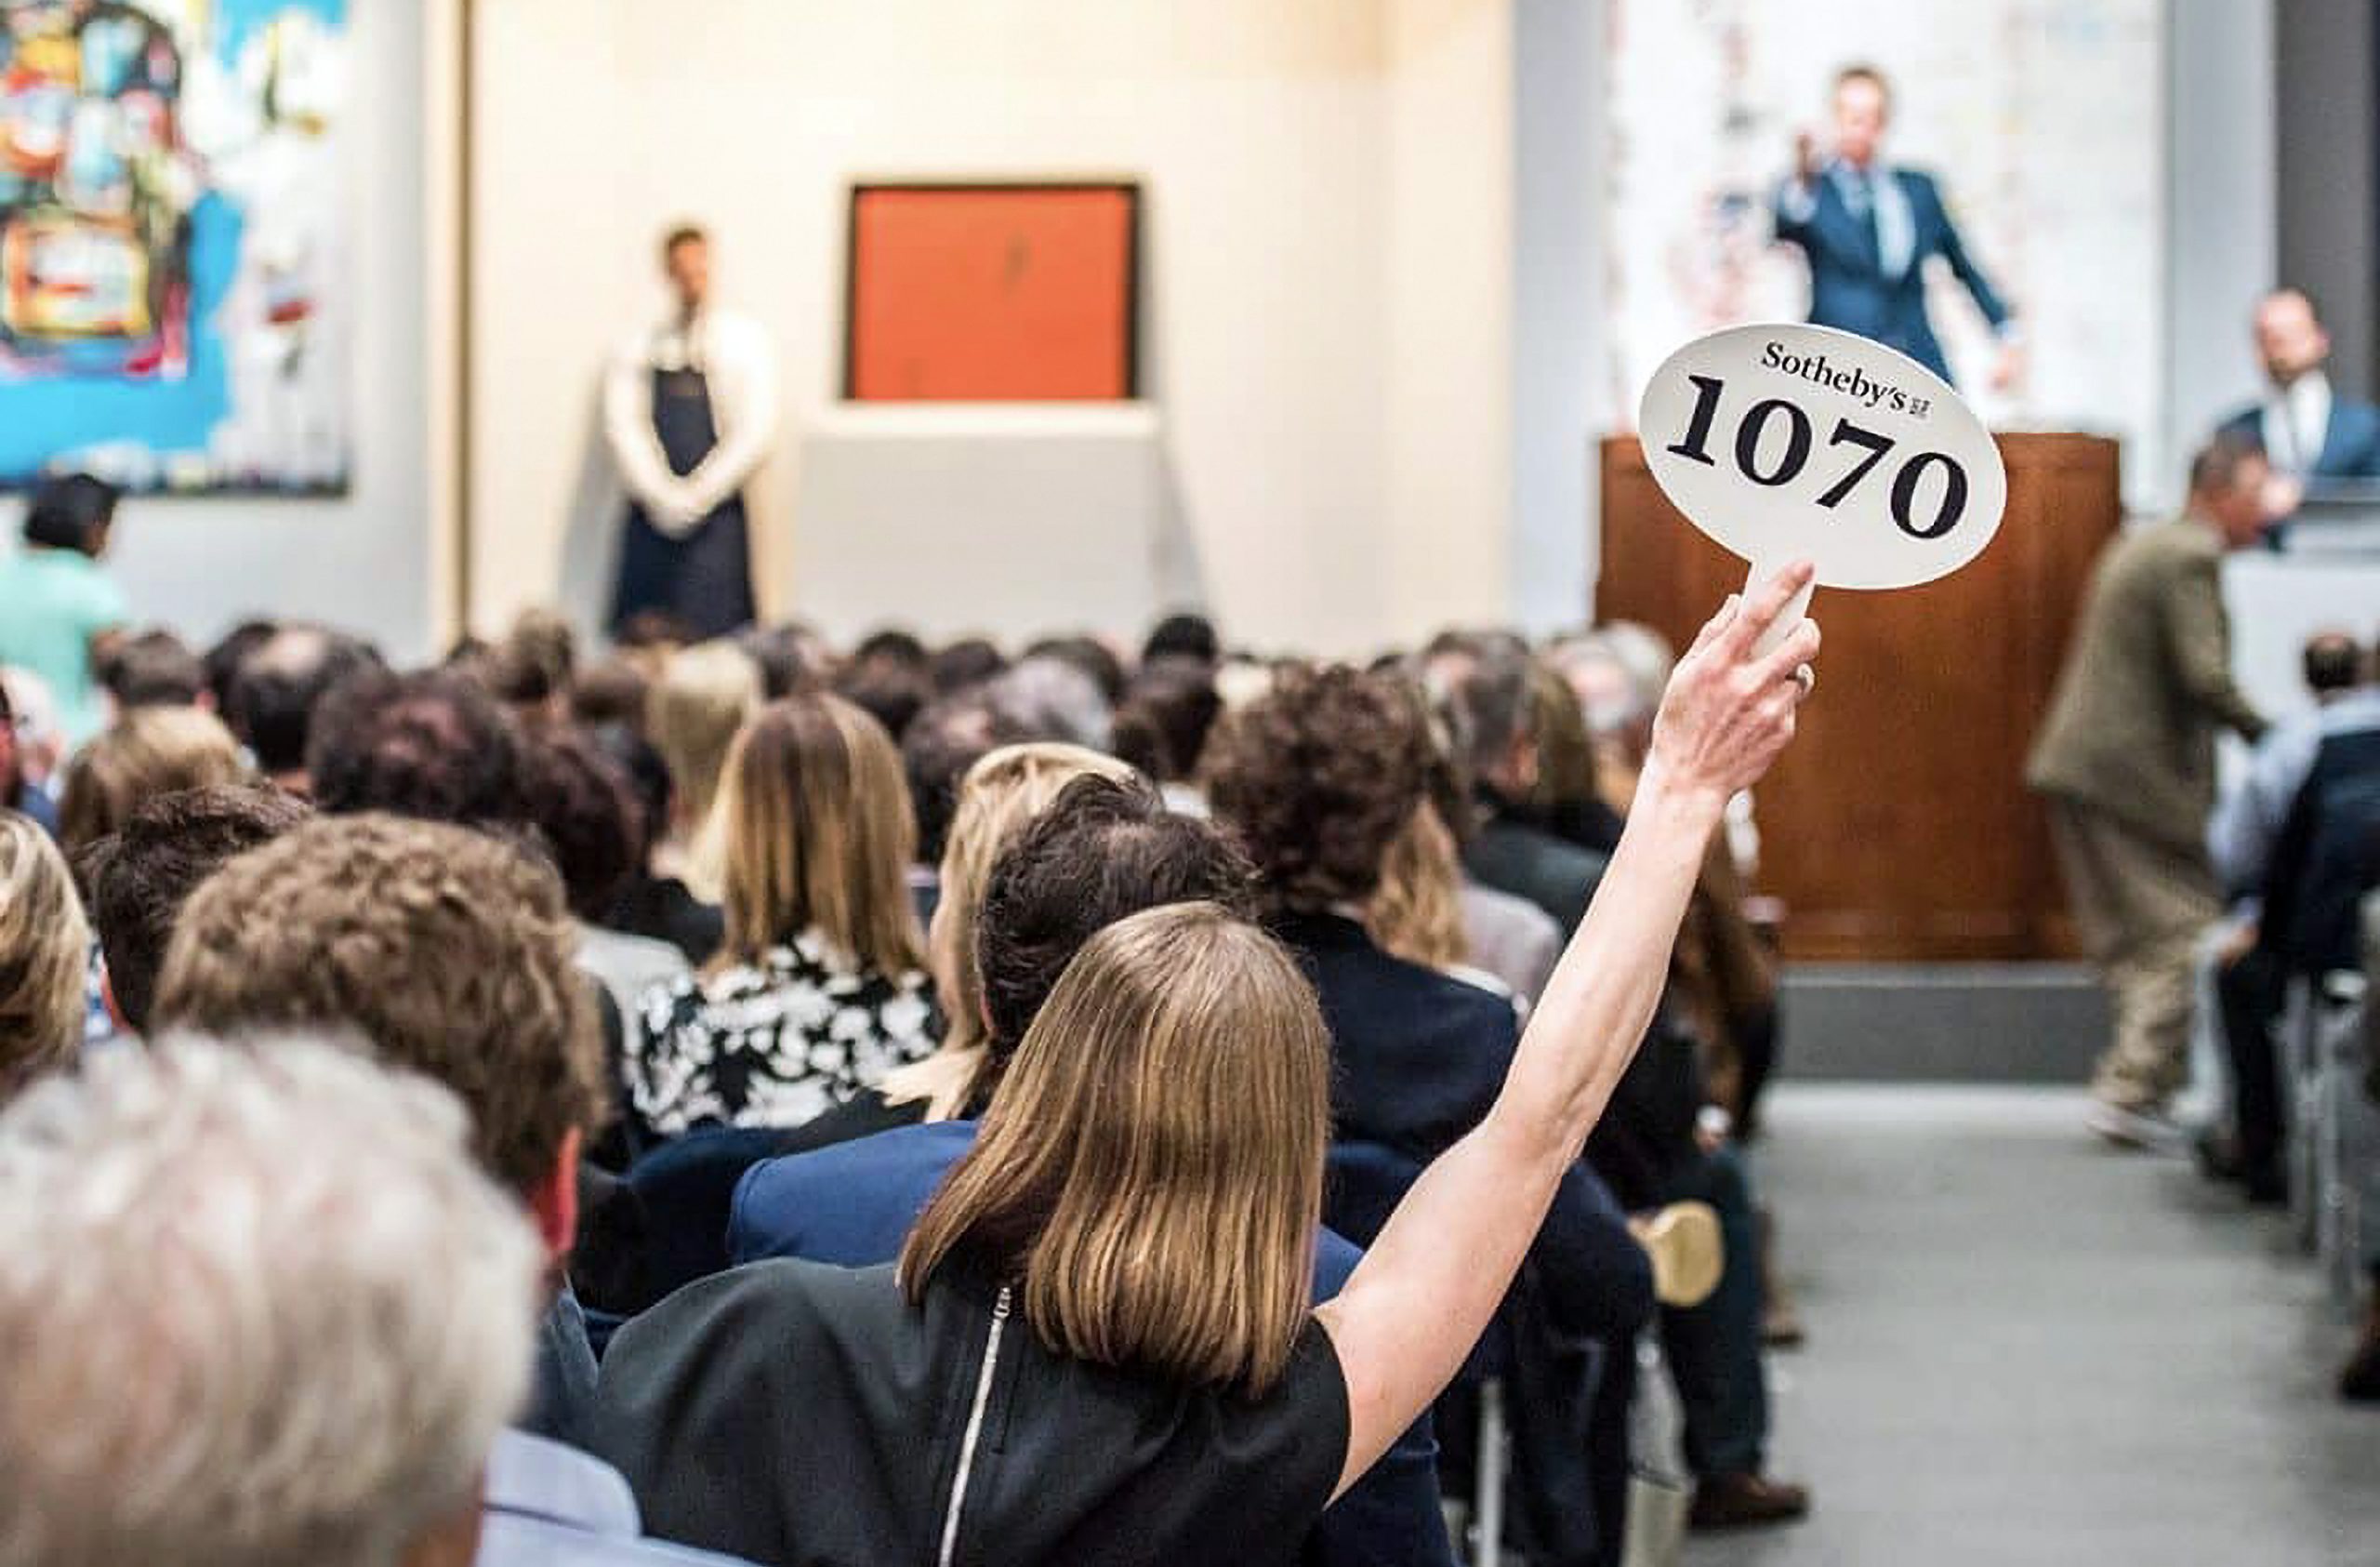 Sotheby's auction image